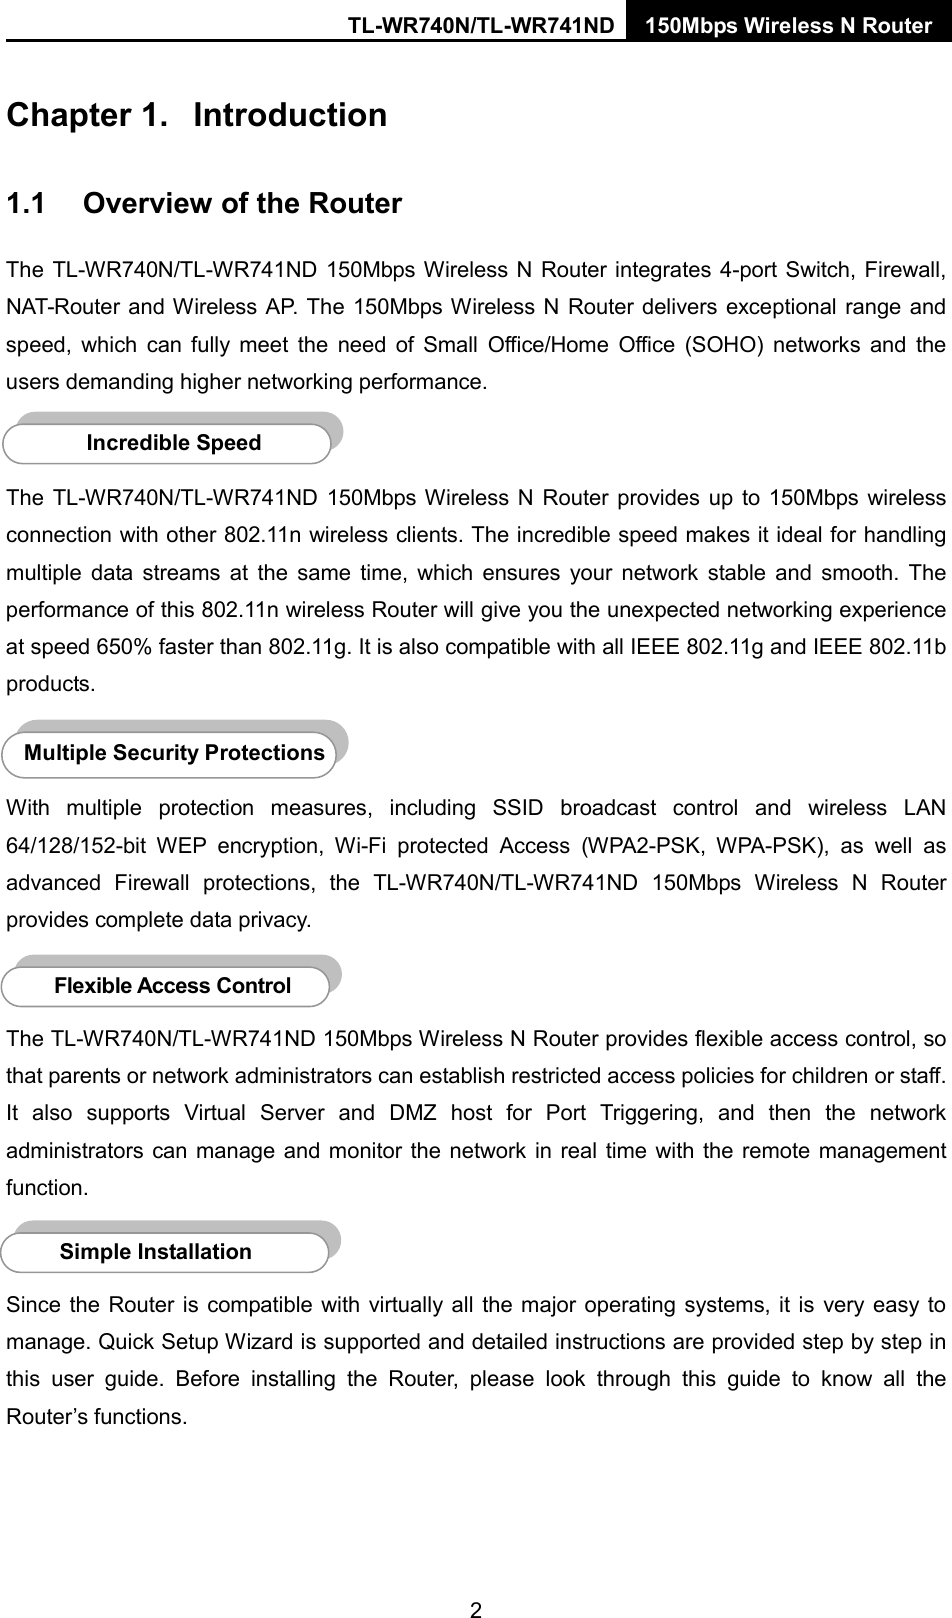 TL-WR740N/TL-WR741ND 150Mbps Wireless N Router  Chapter 1.  Introduction 1.1 Overview of the Router The TL-WR740N/TL-WR741ND 150Mbps Wireless N Router integrates 4-port Switch, Firewall, NAT-Router and Wireless AP. The 150Mbps Wireless N Router delivers exceptional range and speed, which can  fully meet the need of Small Office/Home Office (SOHO) networks and the users demanding higher networking performance.  The  TL-WR740N/TL-WR741ND 150Mbps Wireless N Router provides up to 150Mbps wireless connection with other 802.11n wireless clients. The incredible speed makes it ideal for handling multiple data streams at the same time, which ensures your network stable and smooth.  The performance of this 802.11n wireless Router will give you the unexpected networking experience at speed 650% faster than 802.11g. It is also compatible with all IEEE 802.11g and IEEE 802.11b products.  With multiple protection measures, including SSID broadcast control and wireless LAN 64/128/152-bit WEP encryption,  Wi-Fi protected Access (WPA2-PSK, WPA-PSK), as well as advanced Firewall protections, the TL-WR740N/TL-WR741ND 150Mbps  Wireless N Router provides complete data privacy.     The TL-WR740N/TL-WR741ND 150Mbps Wireless N Router provides flexible access control, so that parents or network administrators can establish restricted access policies for children or staff. It also supports Virtual Server and DMZ host for Port Triggering, and then  the network administrators can manage and monitor the network in real time with the remote management function.    Since the Router is compatible with virtually all the major operating systems, it is  very  easy to manage. Quick Setup Wizard is supported and detailed instructions are provided step by step in this user guide.  Before installing the Router, please look through this guide to know all the Router’s functions. Simple Installation Flexible Access Control  Multiple Security Protections Incredible Speed  2 